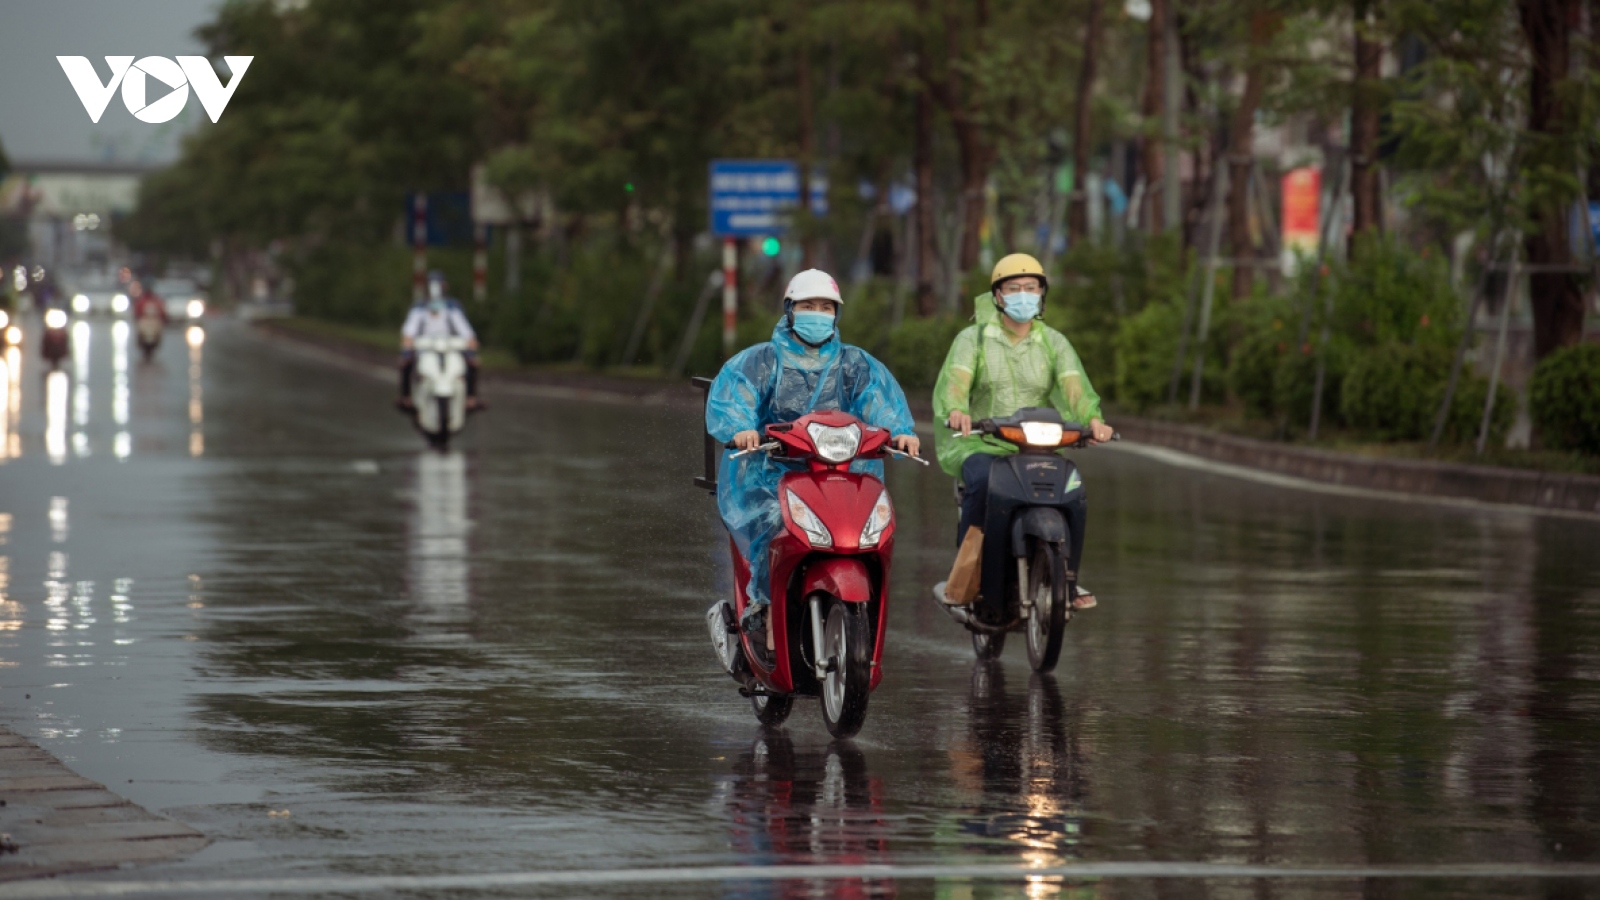 Social distancing period leads to quiet rush hour in Hanoi 